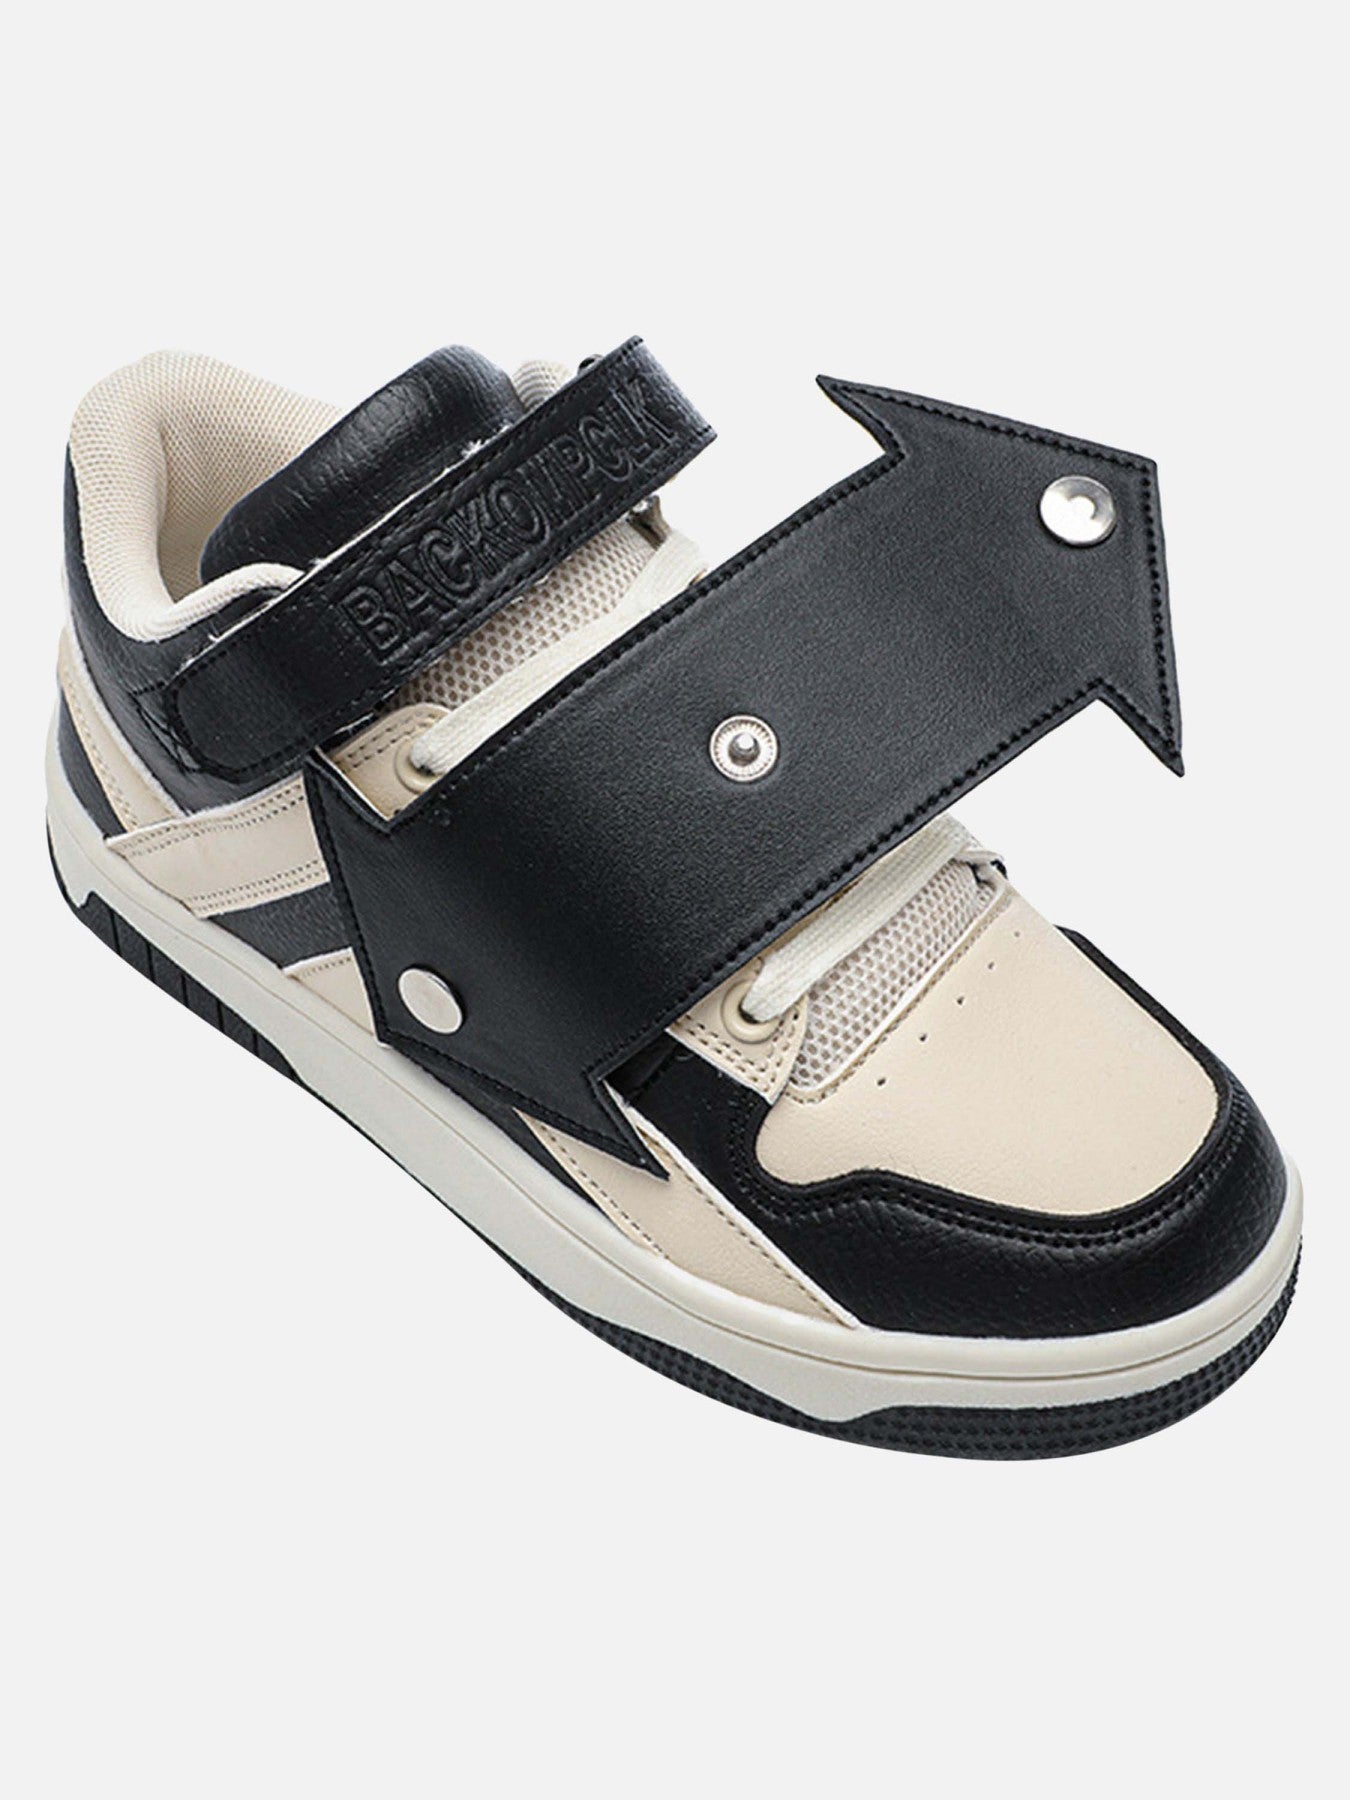 The Supermade Velcro Removable Couple Board Shoes